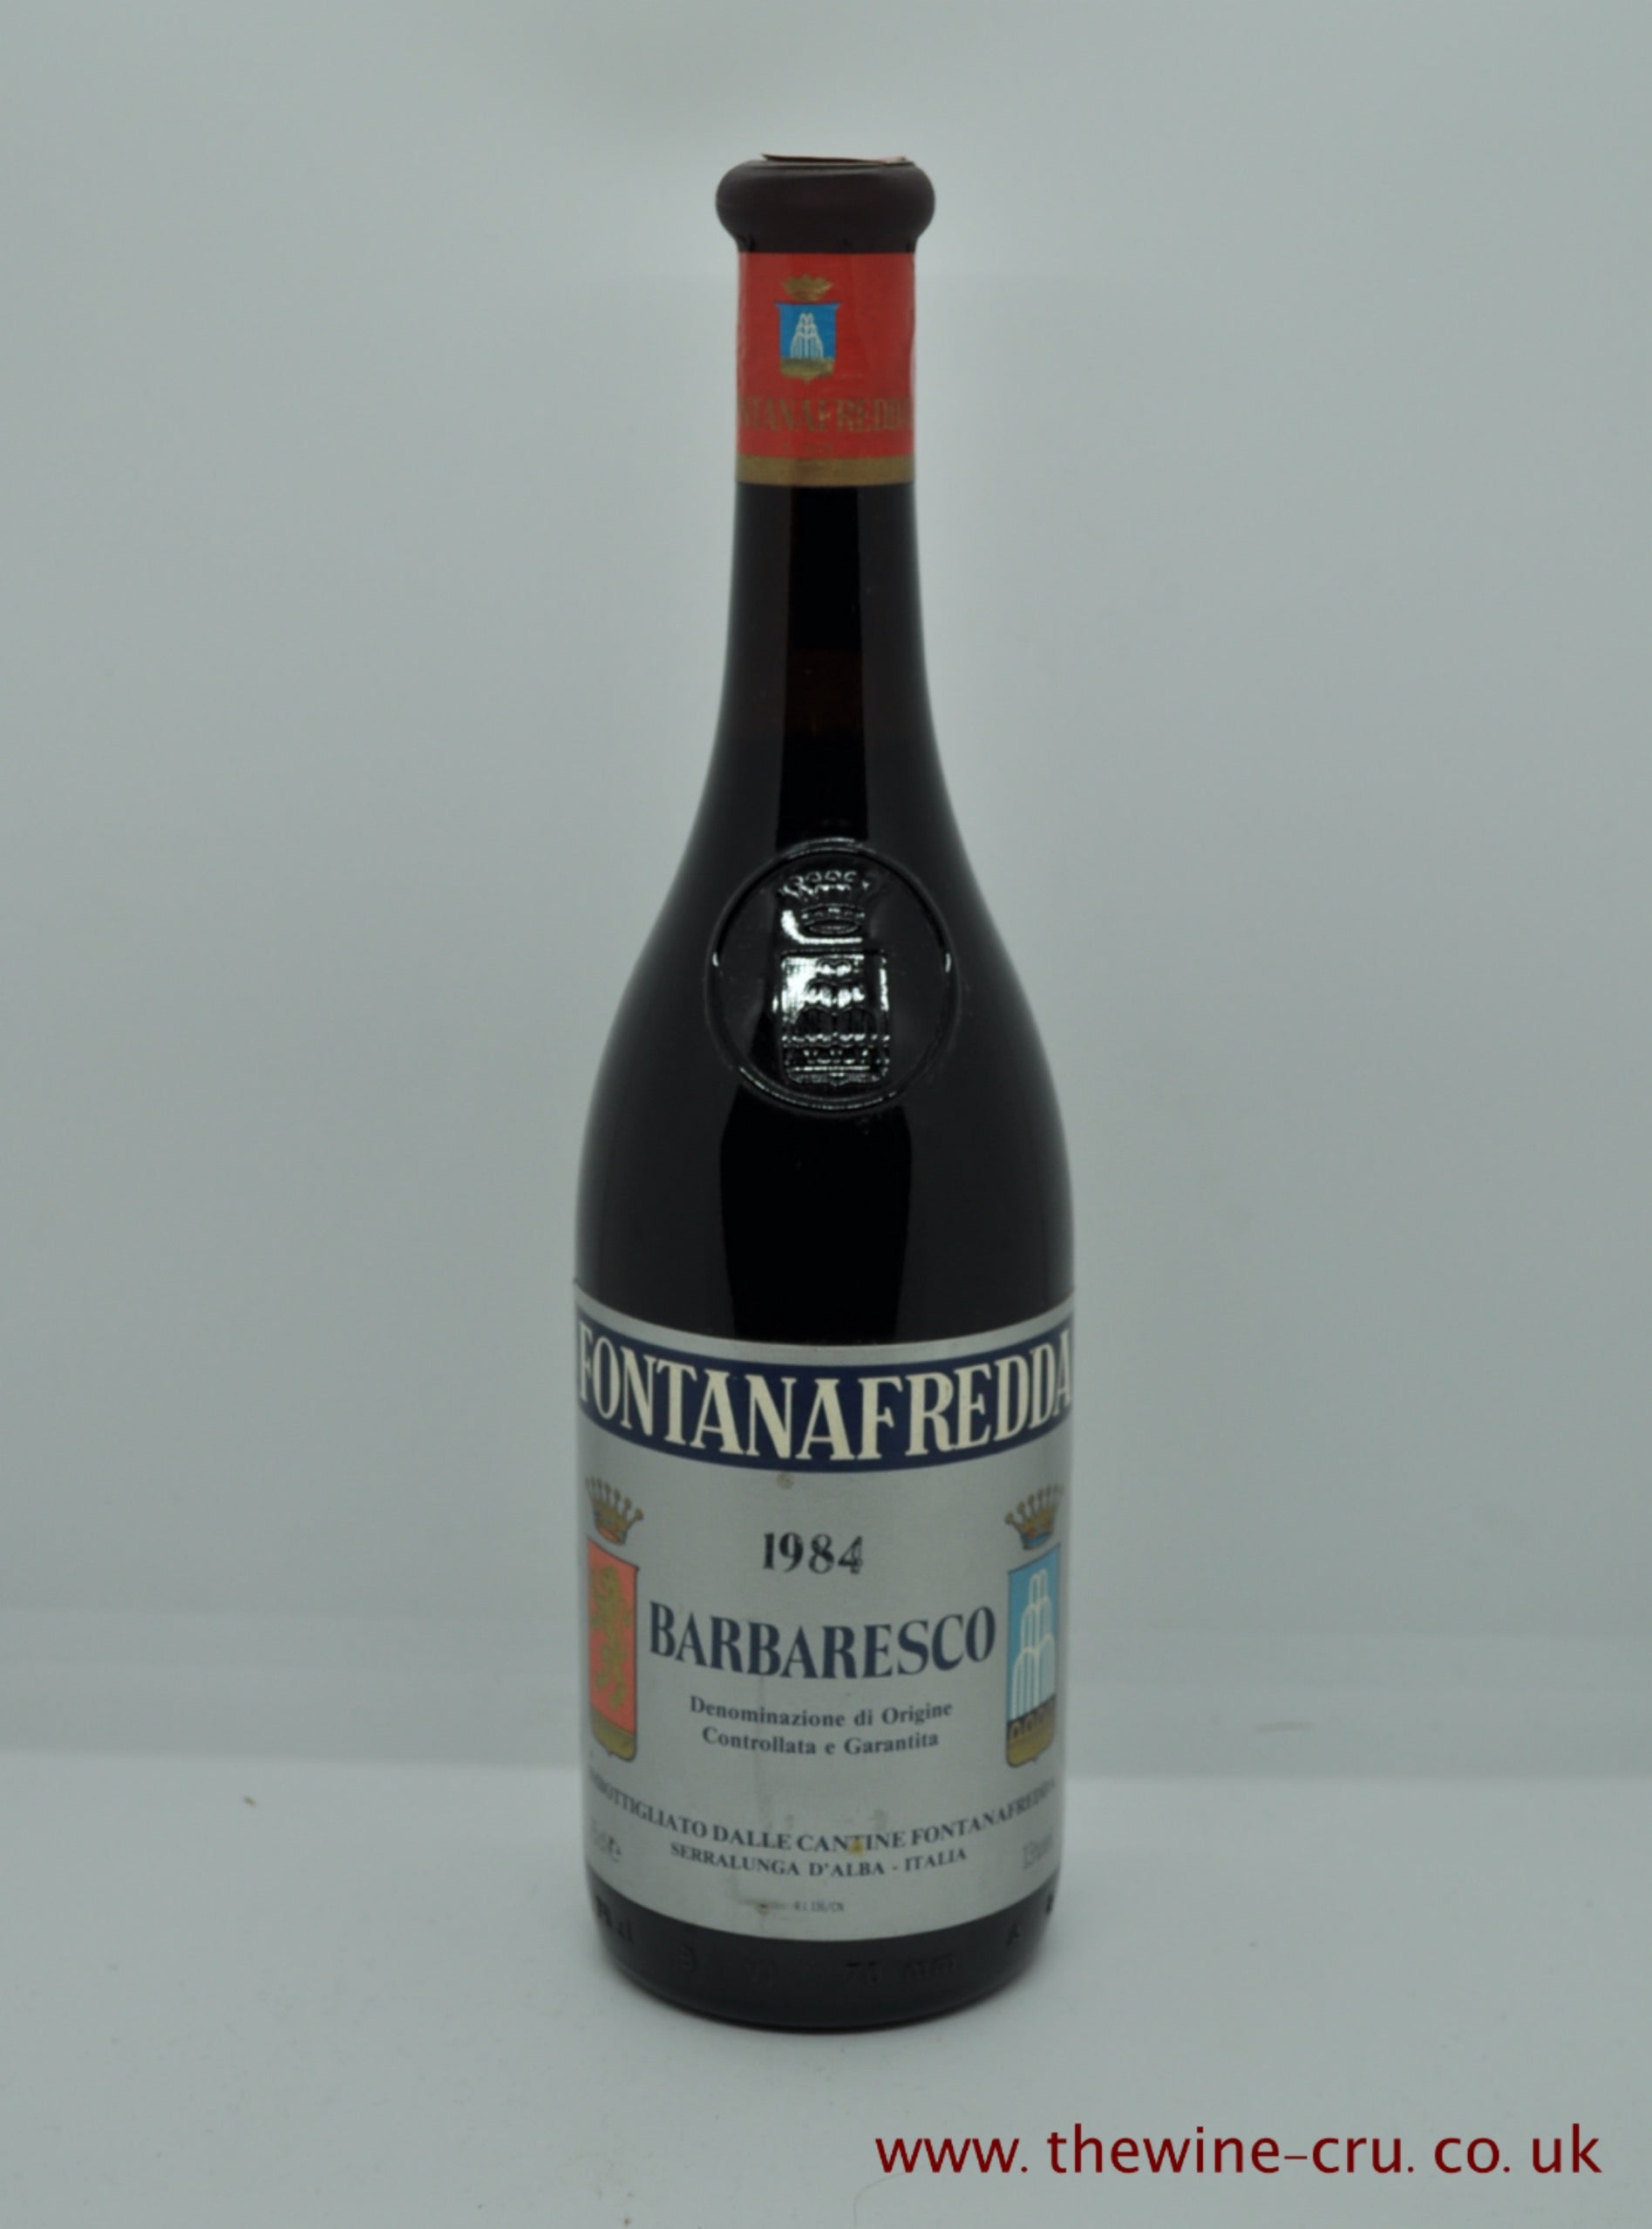 1984 vintage red wine. Fontanafredda Barbaresco, Italy. The bottle is in good condition with the wine level being  3cm below the cork. Immediate delivery. Free local delivery. Gift wrapping available.